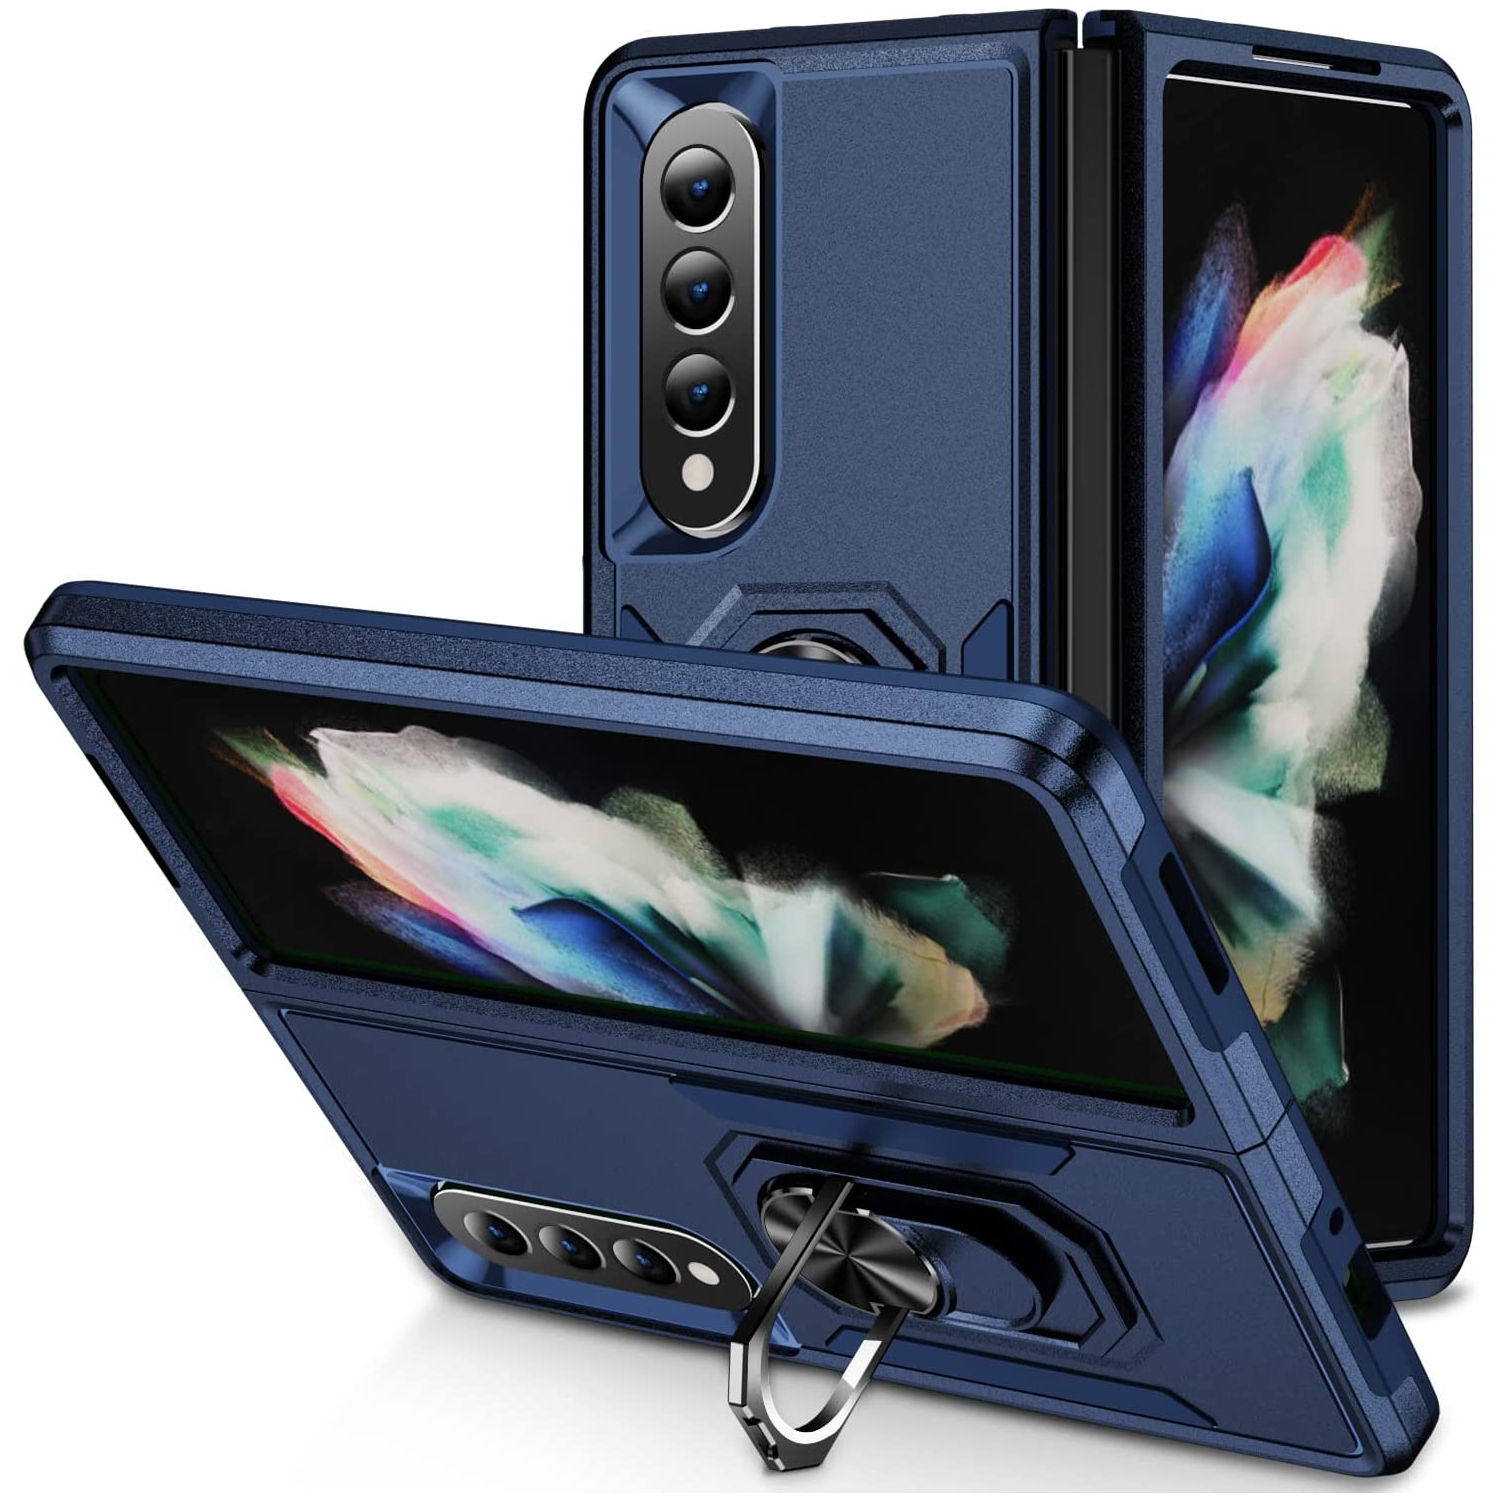 XCRS Slim Design Comm Armor Protection Cover, with 360° Ring Holder Kickstand, Hard PC Slim Shock Proof Protective Case for Samsung Galaxy Z Fold 4